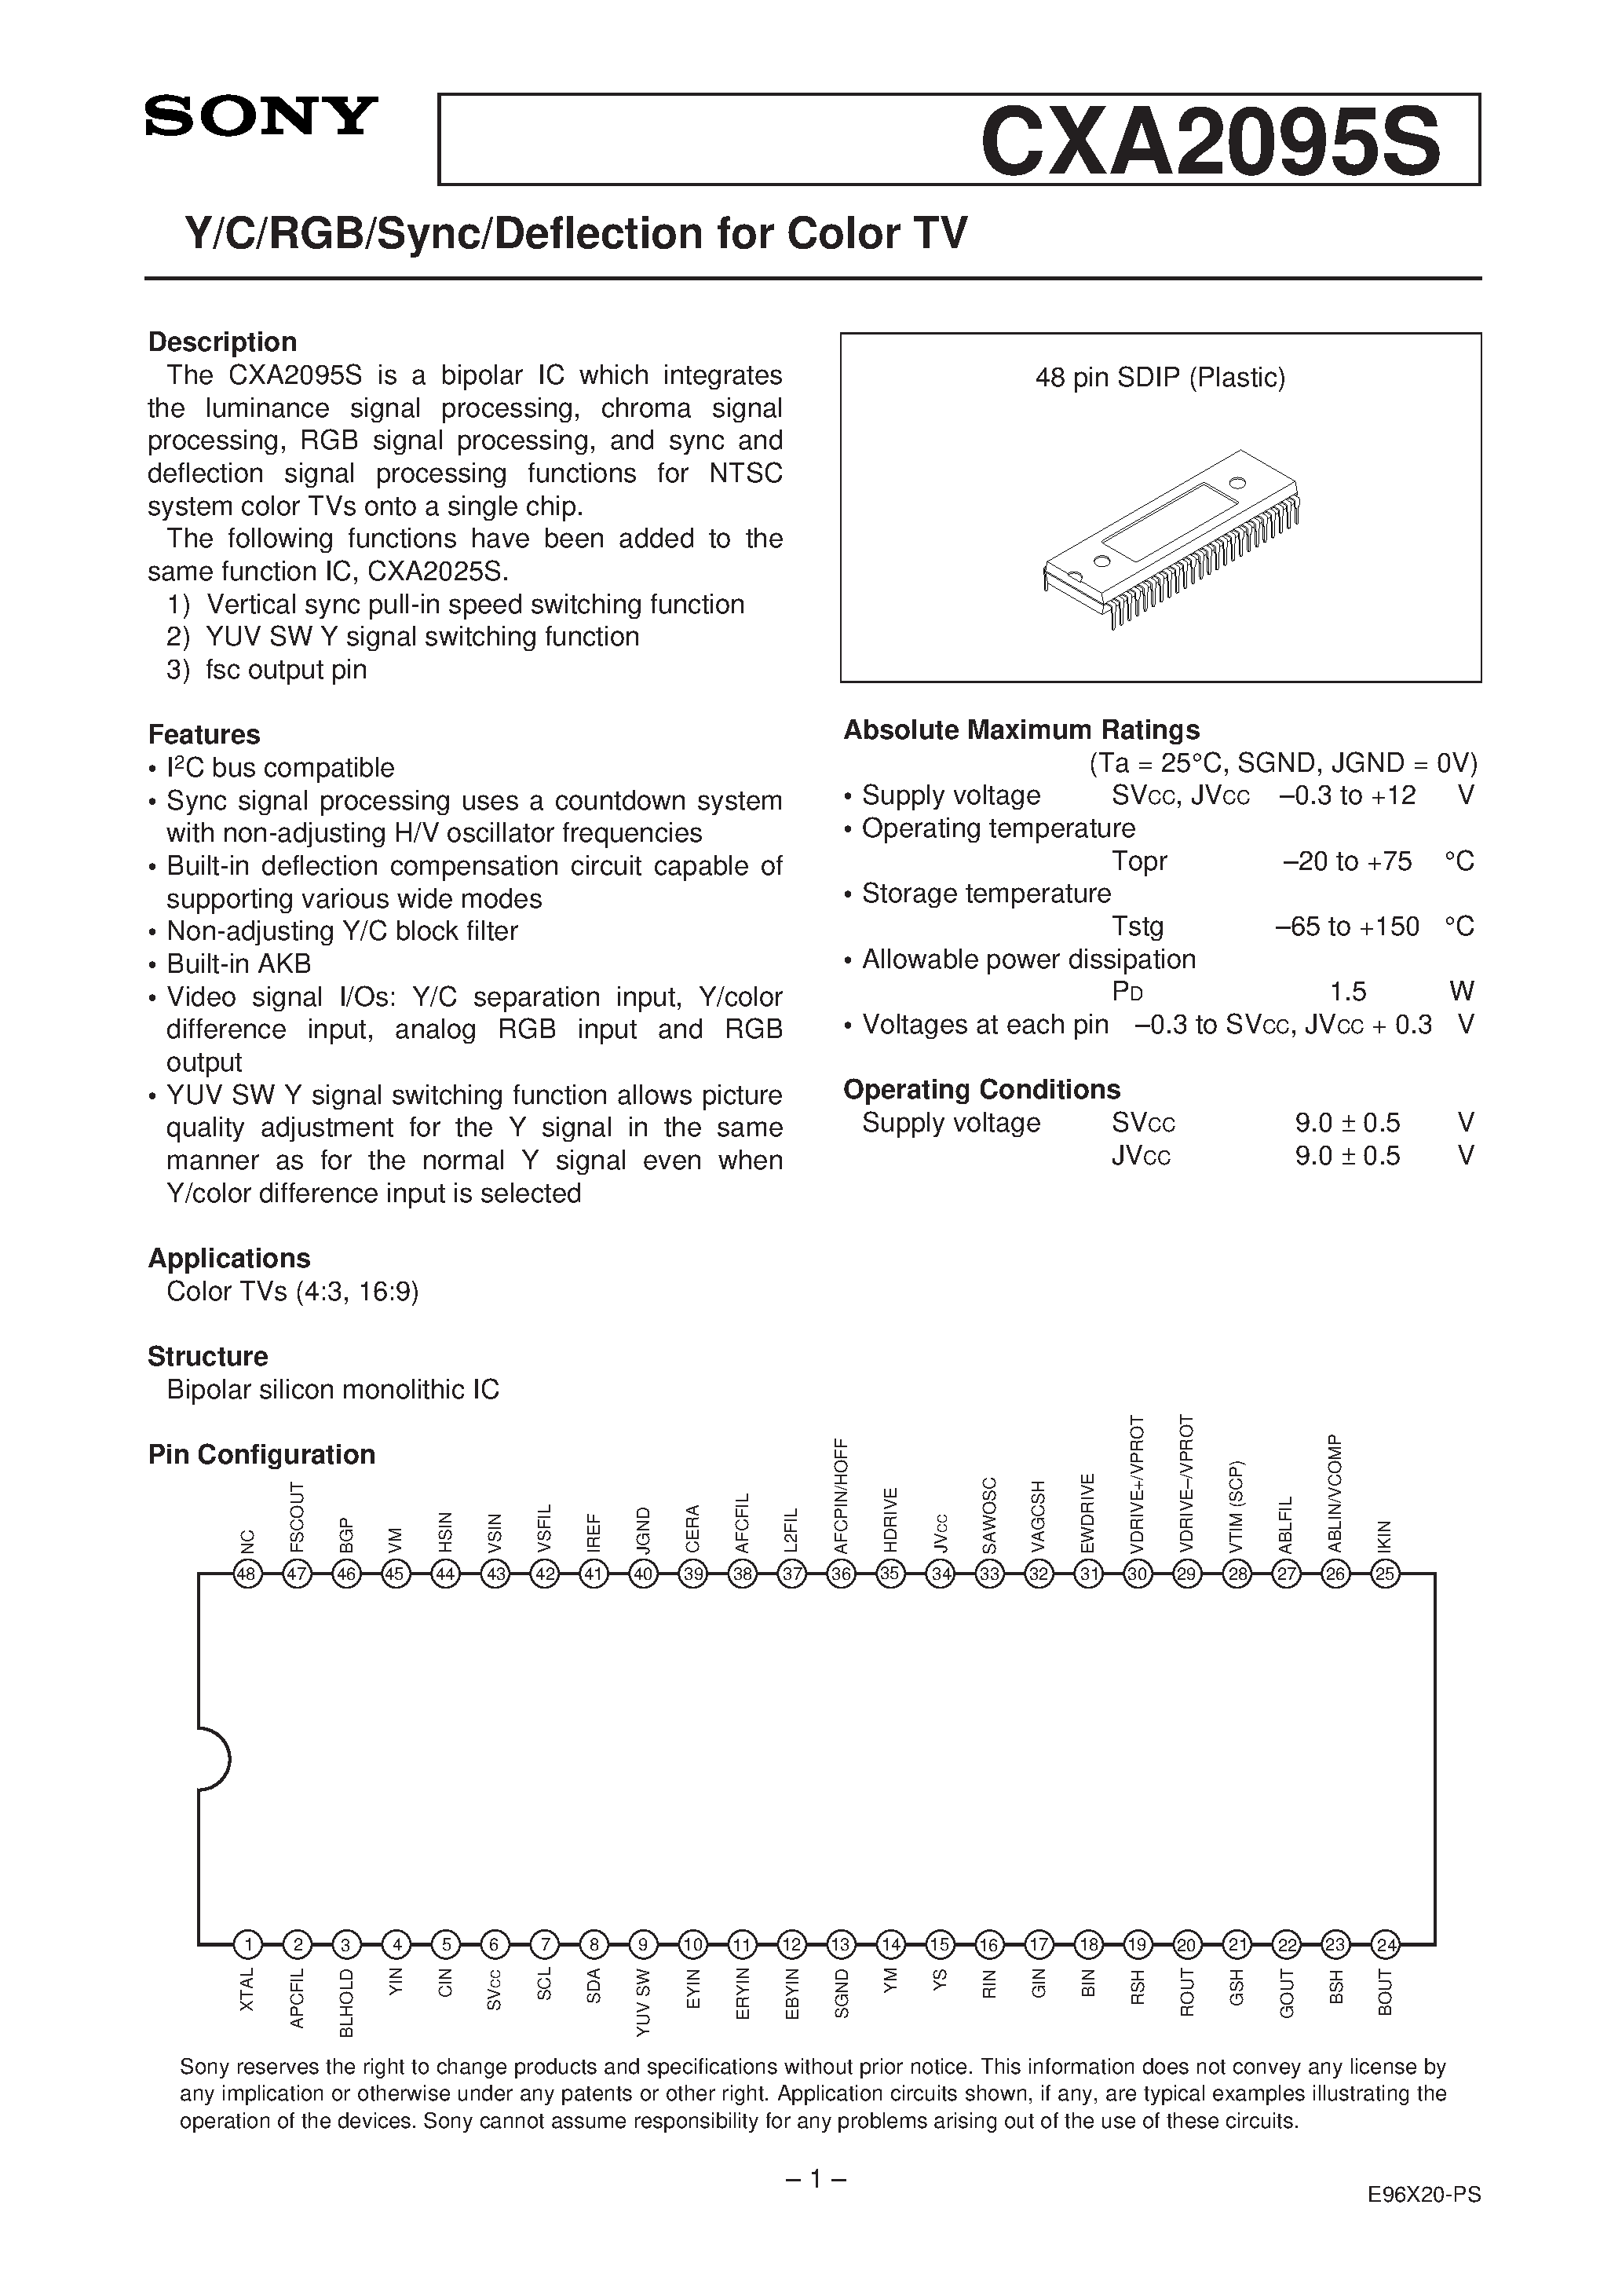 Datasheet CXA2095 - Y/C/RGB/Sync/Deflection for Color TV page 1